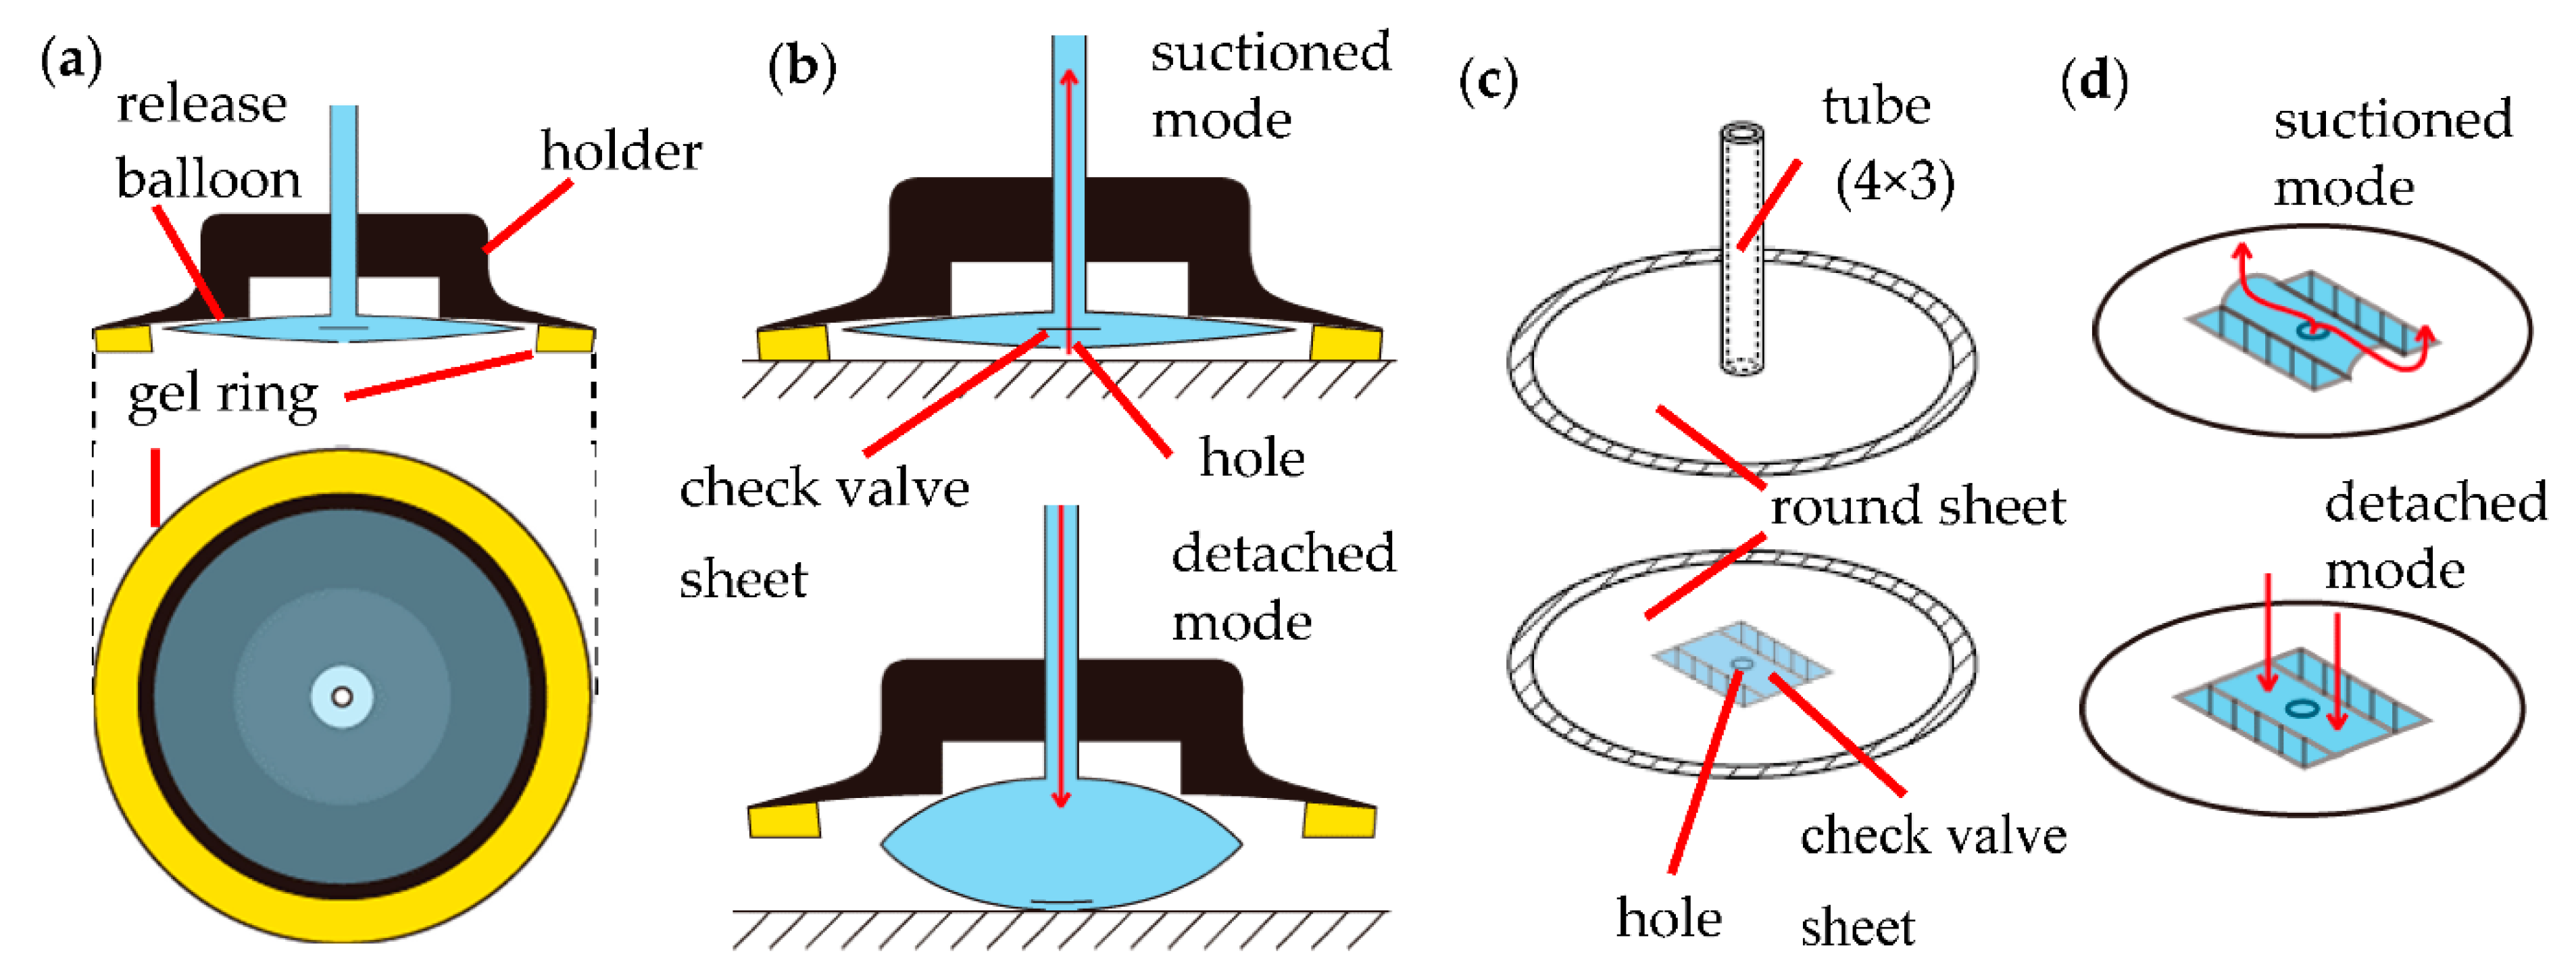 materials - How do suction cups work? - Engineering Stack Exchange